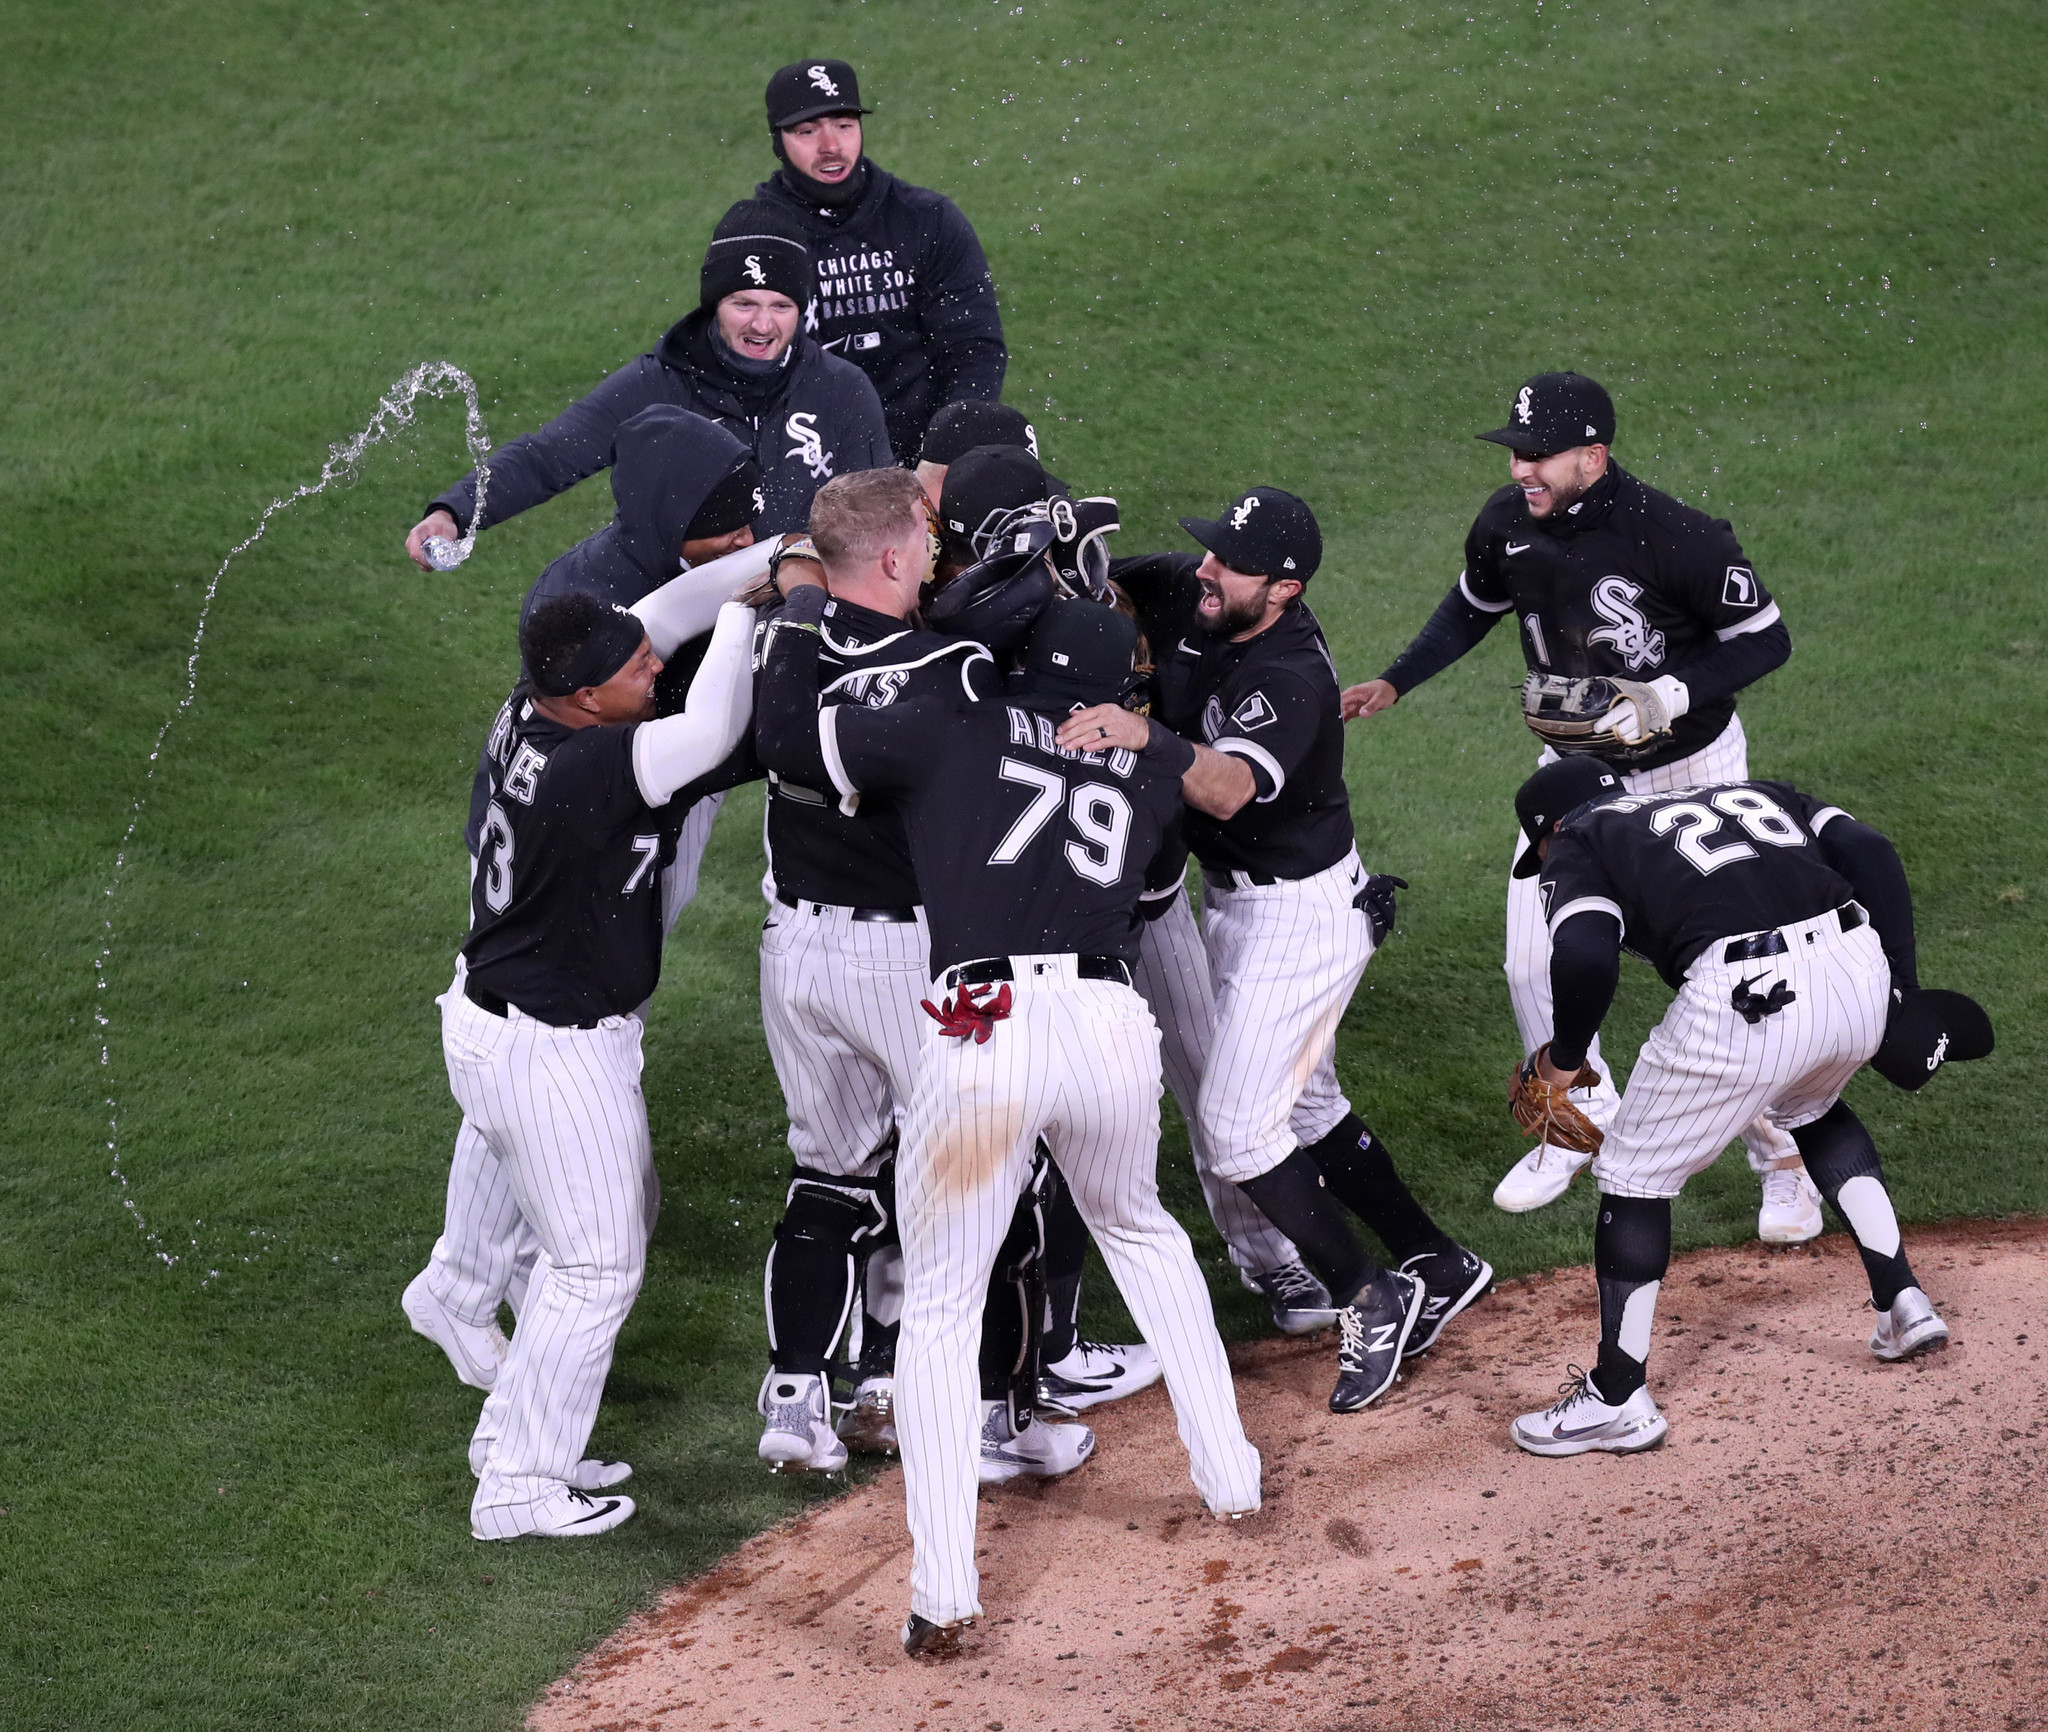 Sox vs. Cubs: A Memorial Day Treat, by Chicago White Sox